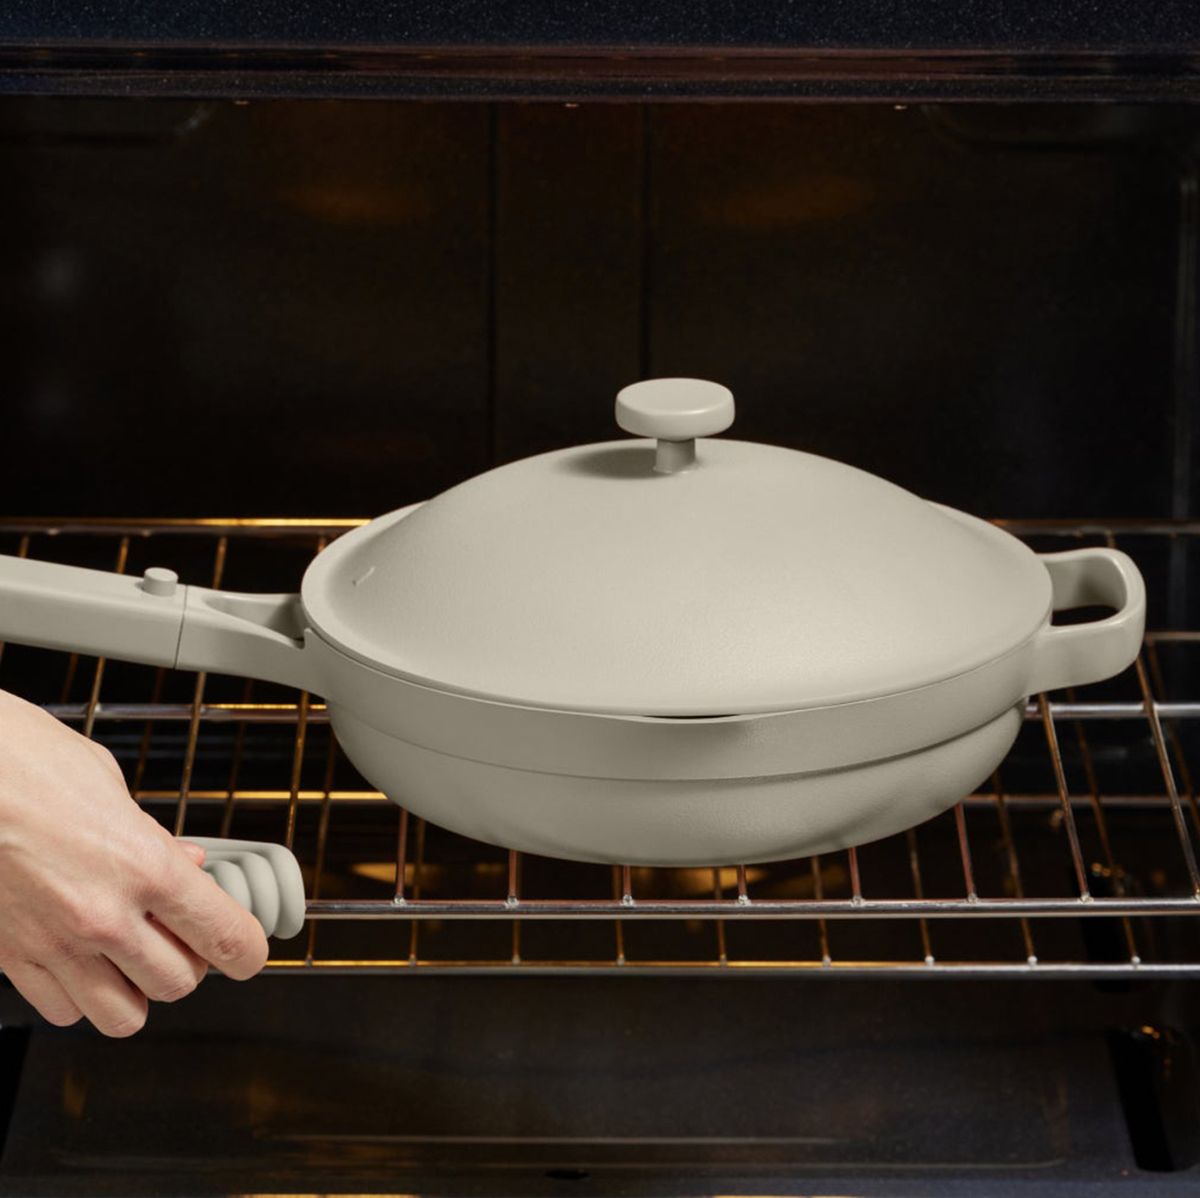 Green+Life Saucepan: these pans are Lead-free, but I do not